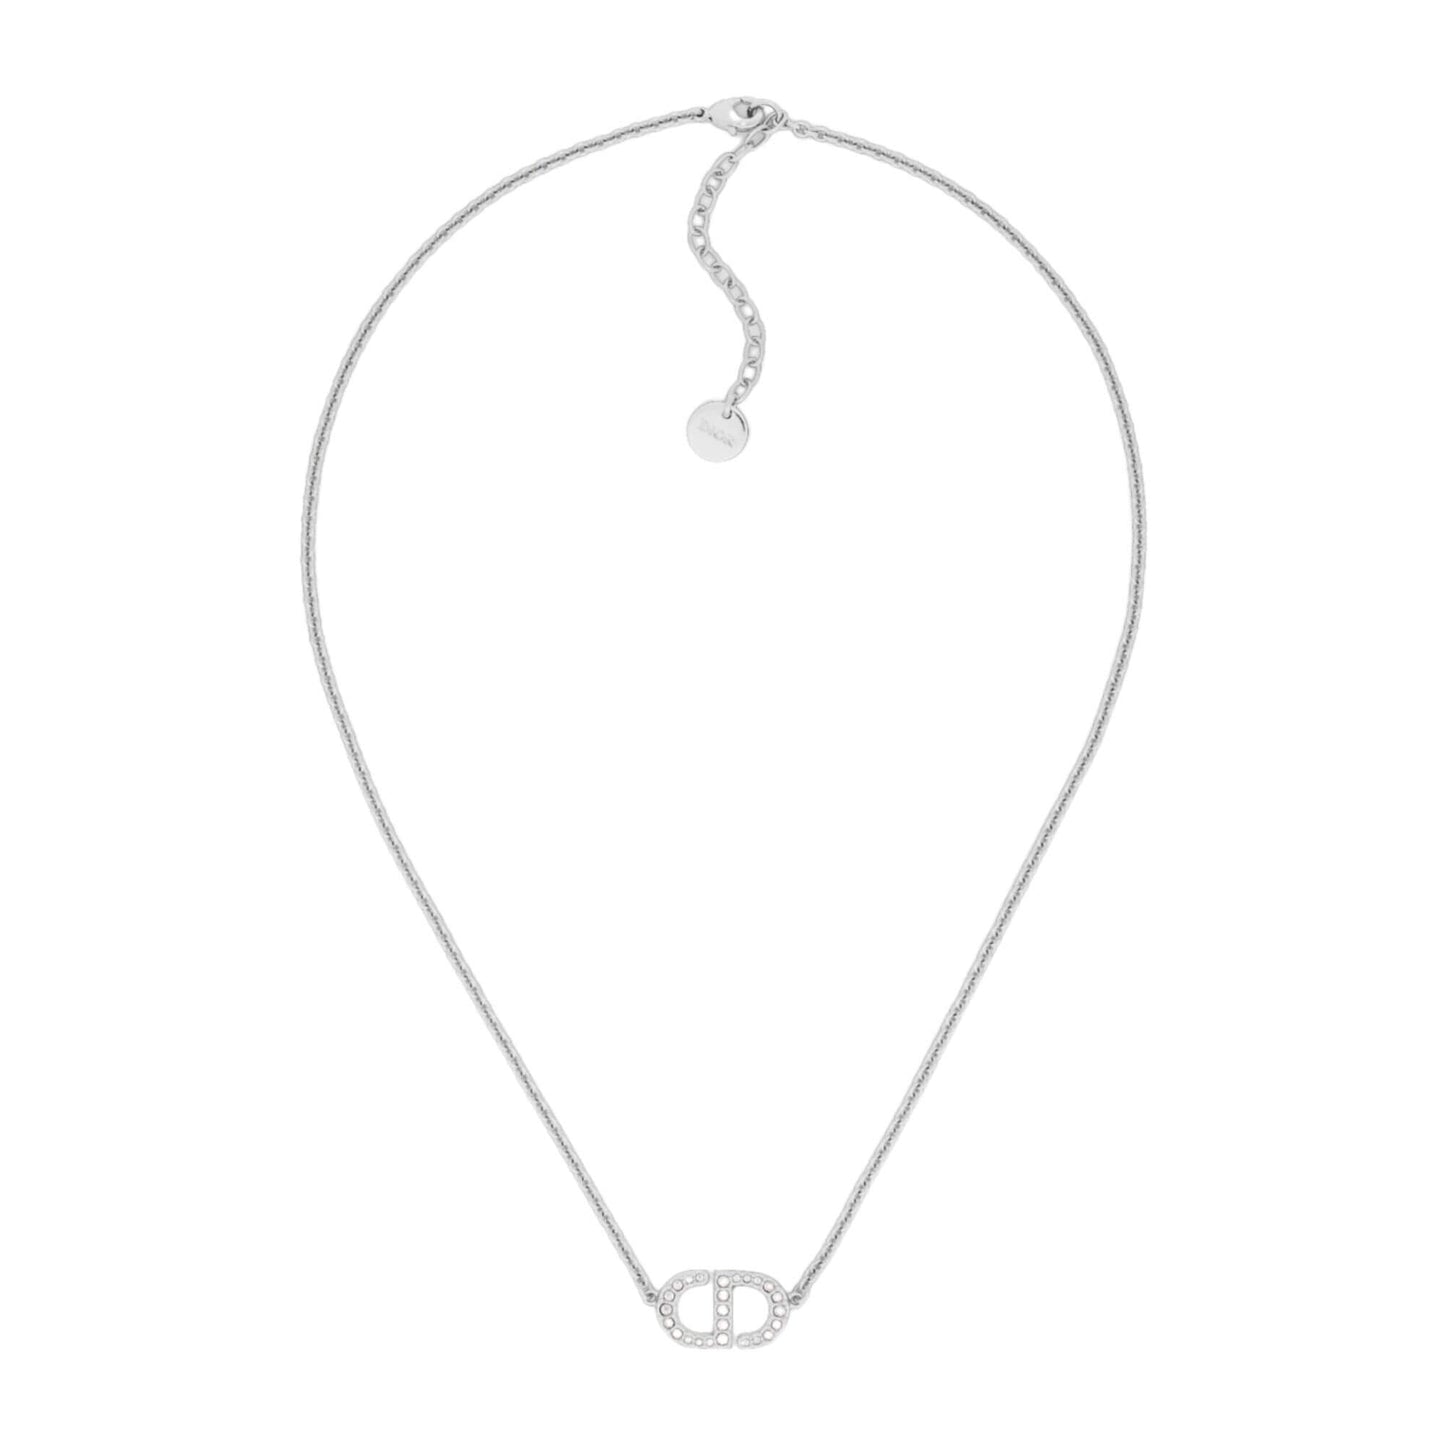 DIOR PETIT CD NECKLACE SILVER-FINISH METAL WITH WHITE CRYSTALS